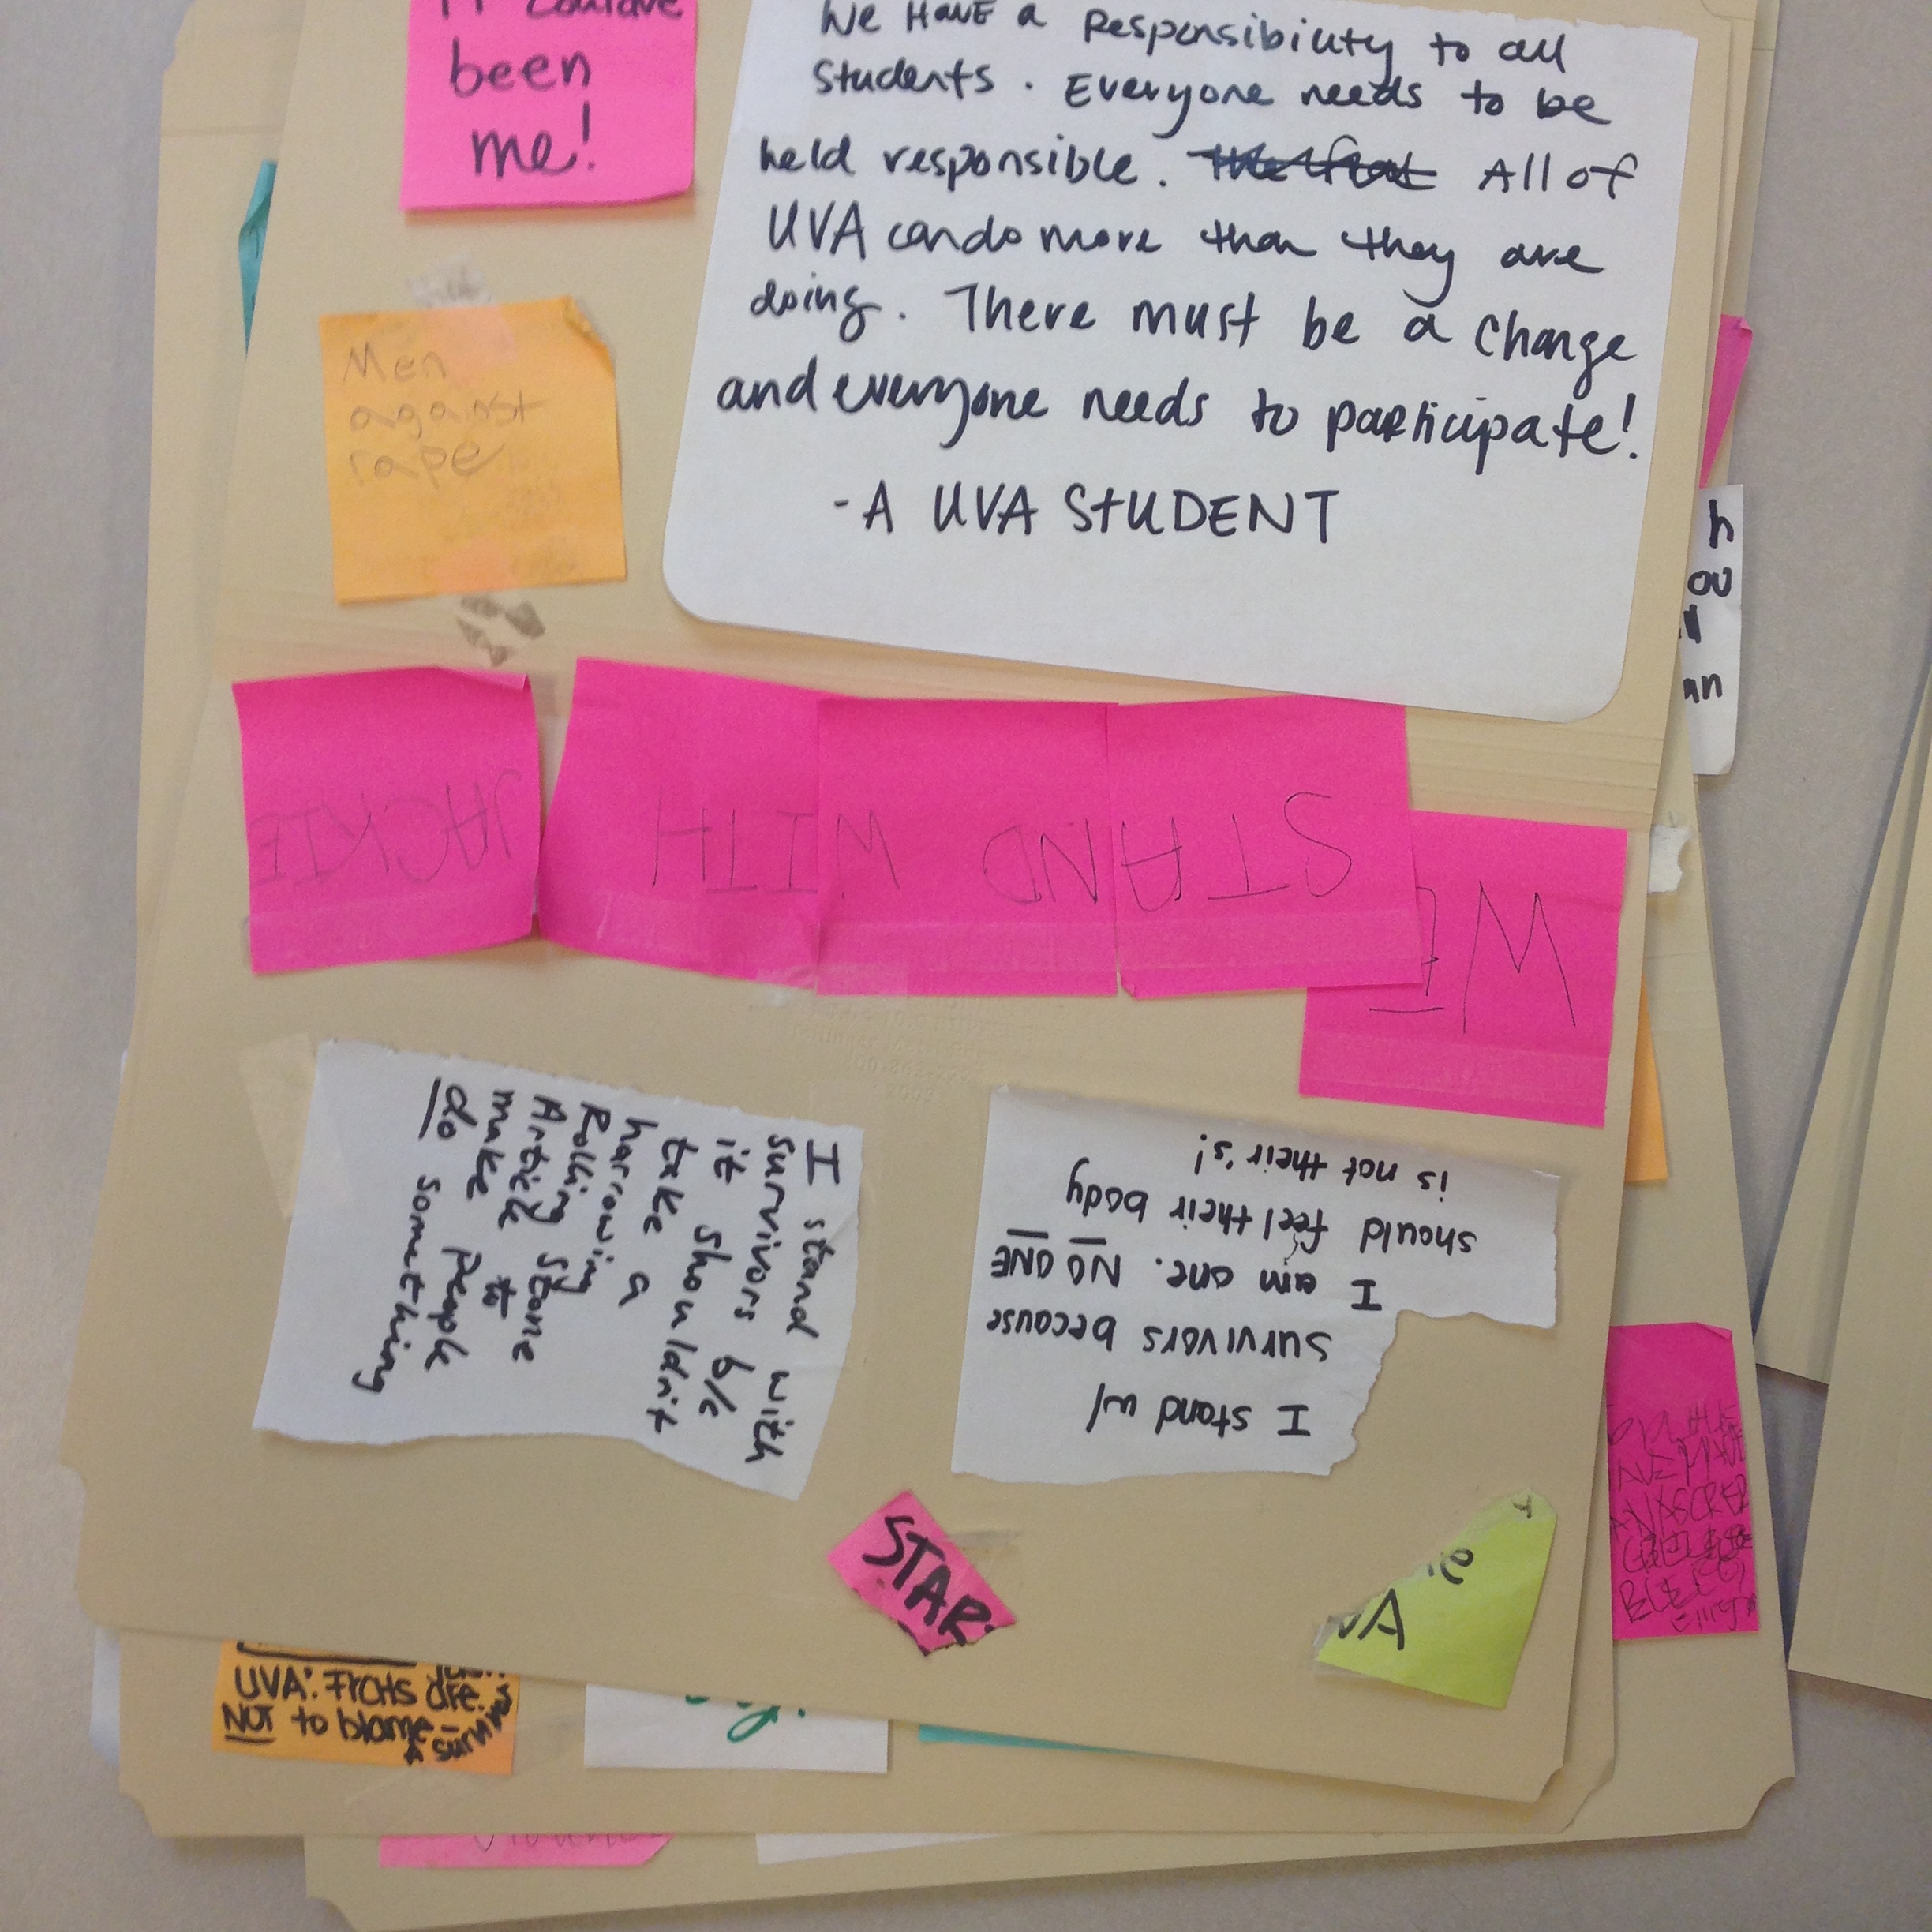 Notes from Peabody Hall door, temporarily housed on archival folders, 10 December 2014. (Photograph by Edward Gaynor)